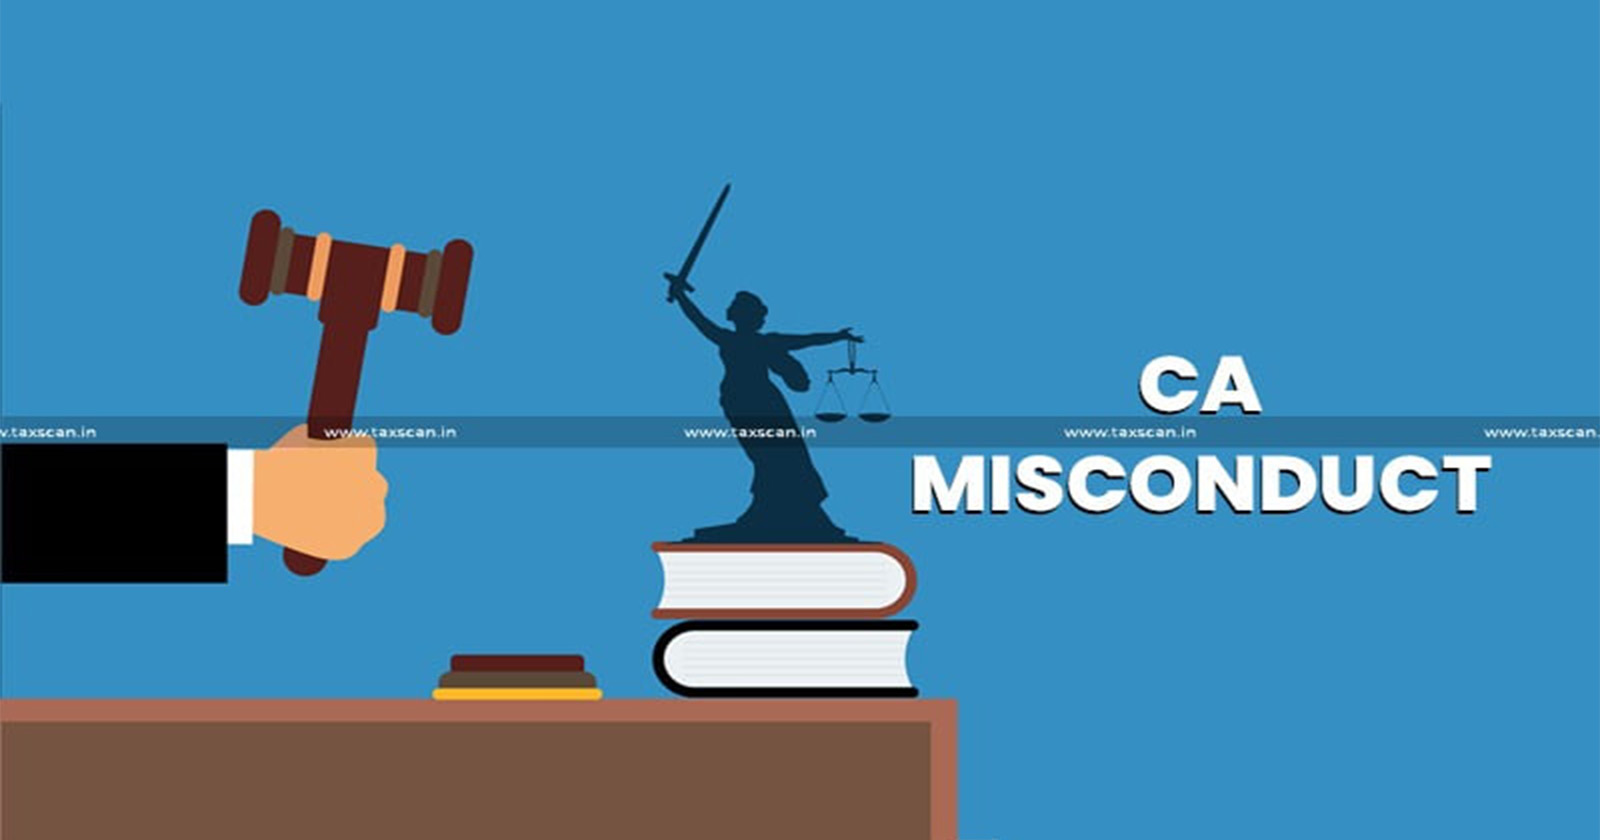 CA Misconduct - Supreme Court - Referral Powers - ICAI Board of Discipline - taxscan